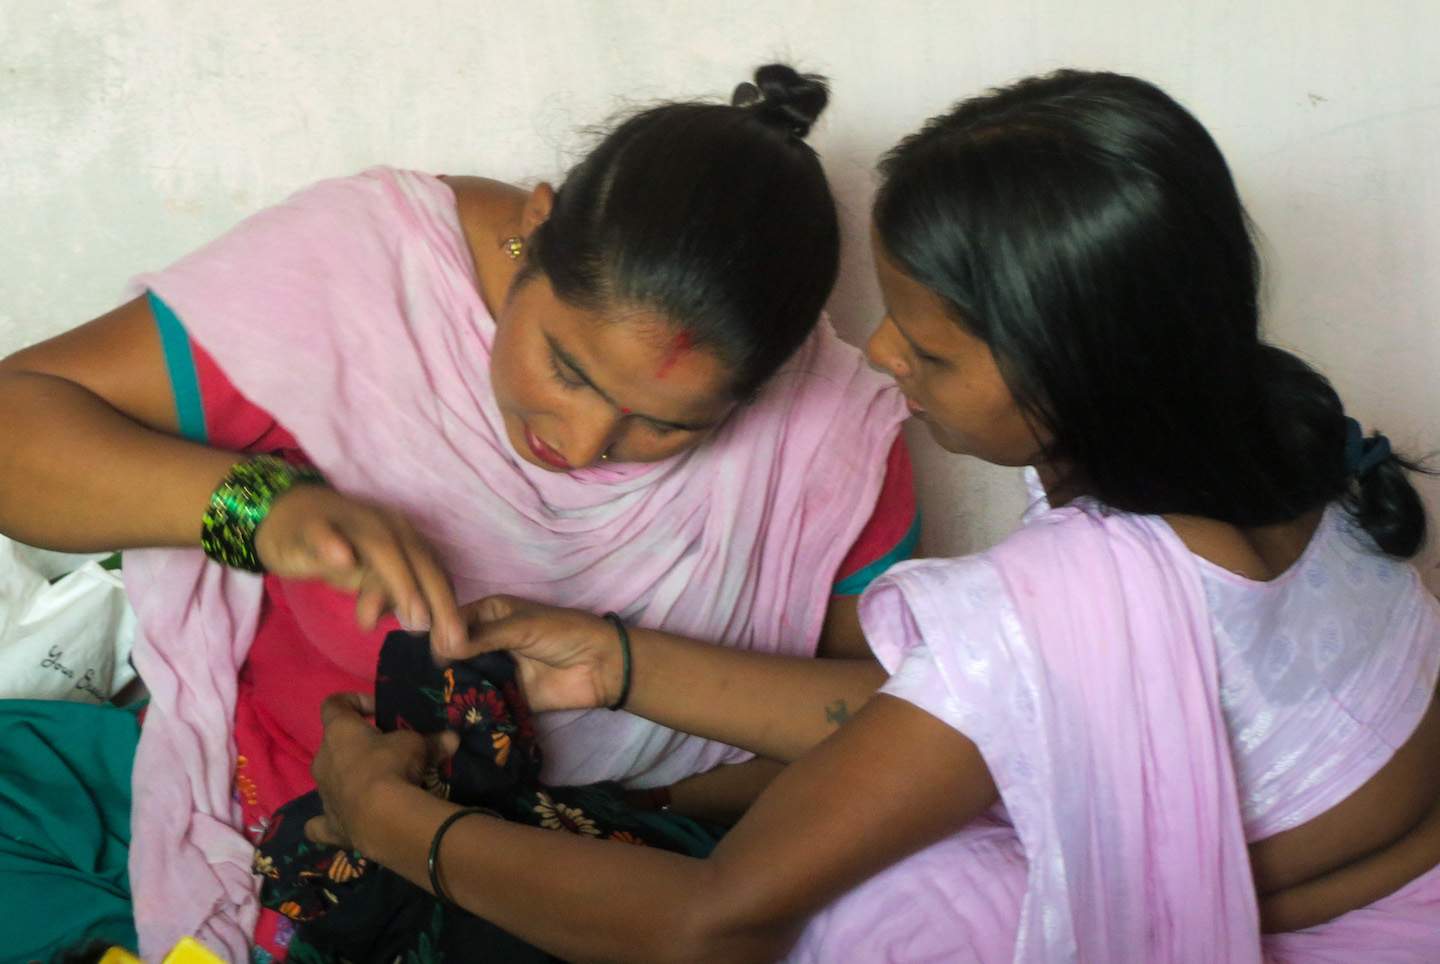 Through IGO evangelists, two women develop skills with a sewing machine, enabling them to escape from the discrimination single women face in India.